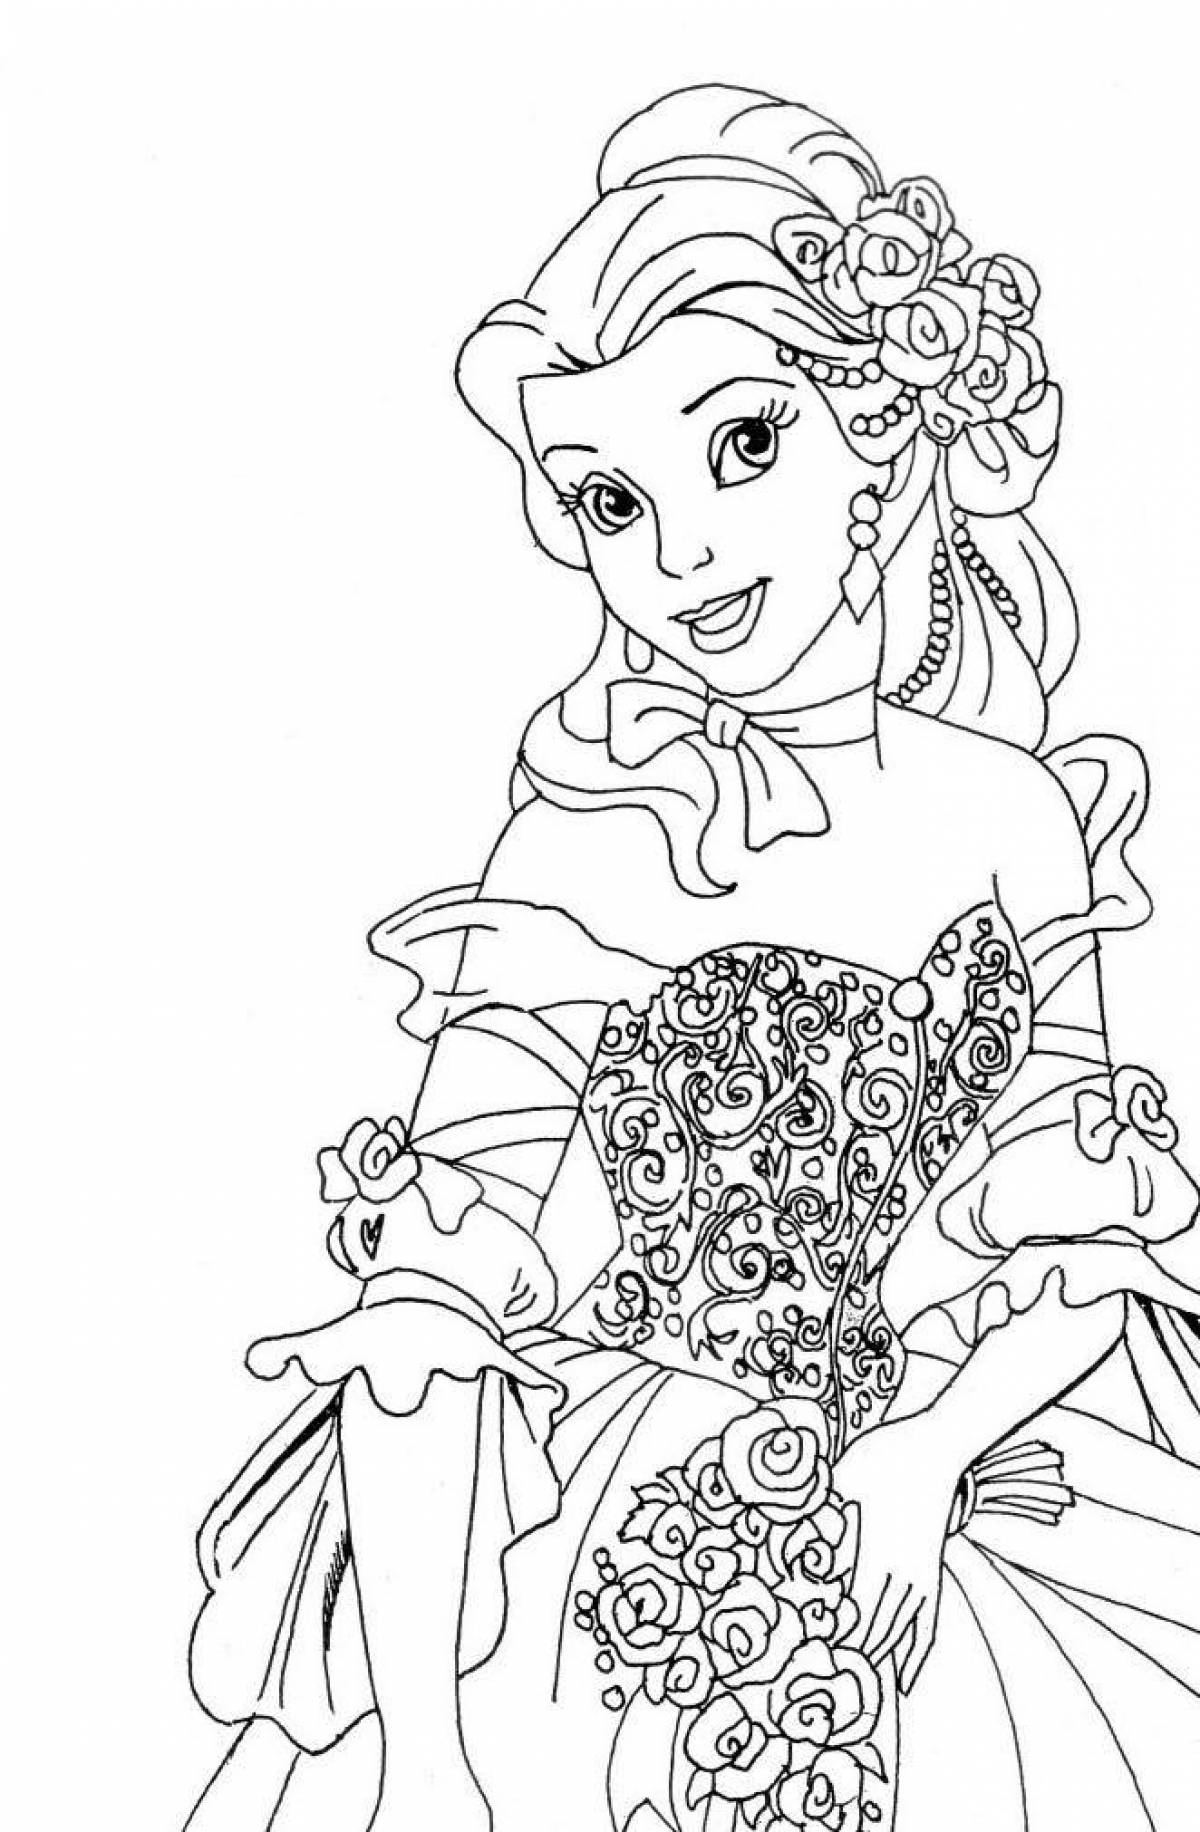 Fabulous coloring pages for girls with disney princesses